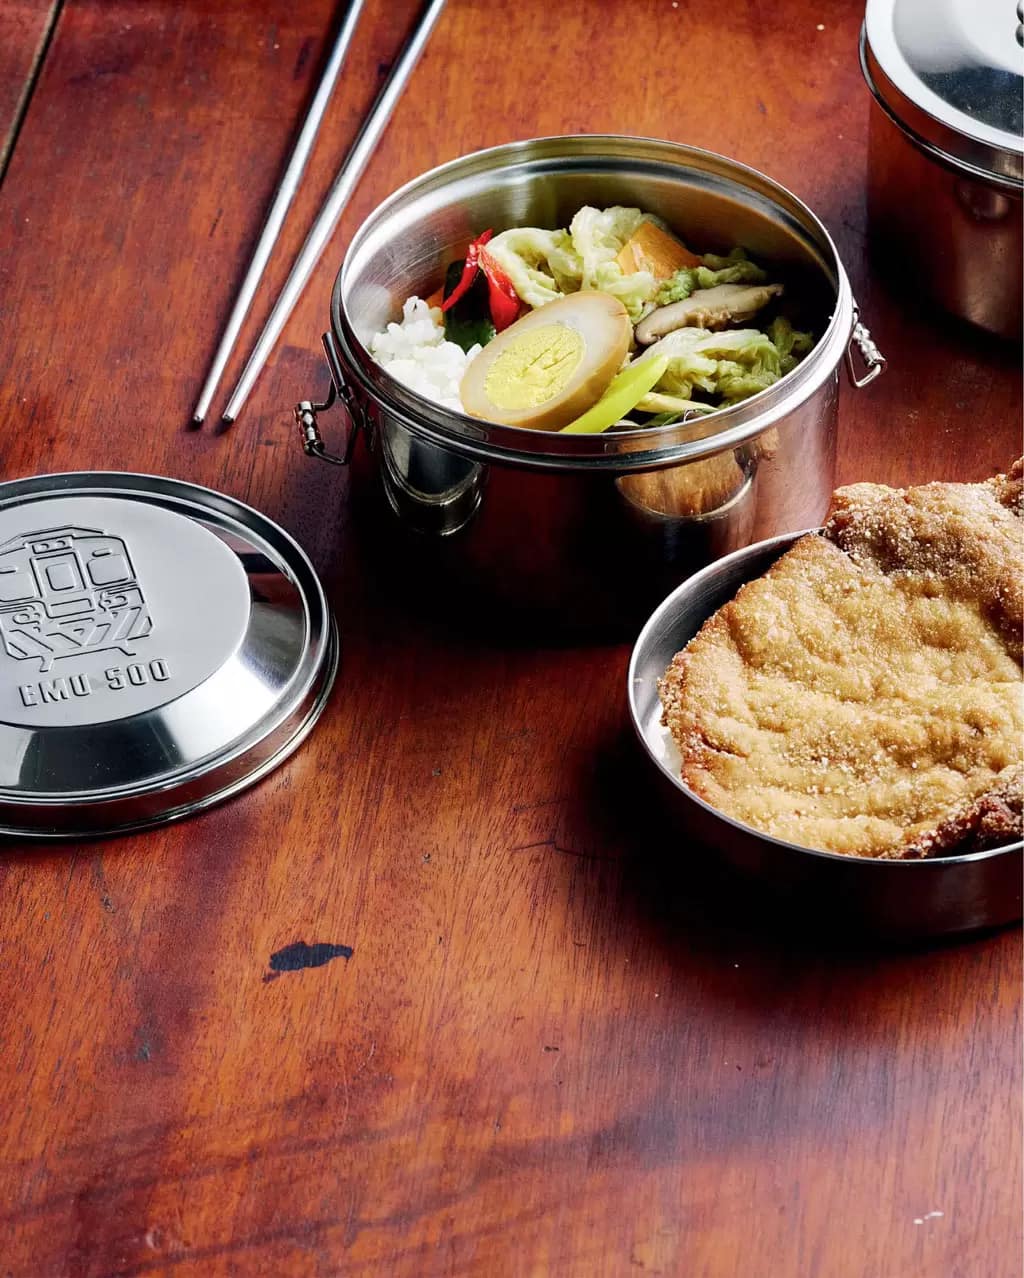 A fried pork chop in a stainless steel bento box, with rice and pickles and salad in the other half, and a pair of metal chopsticks.